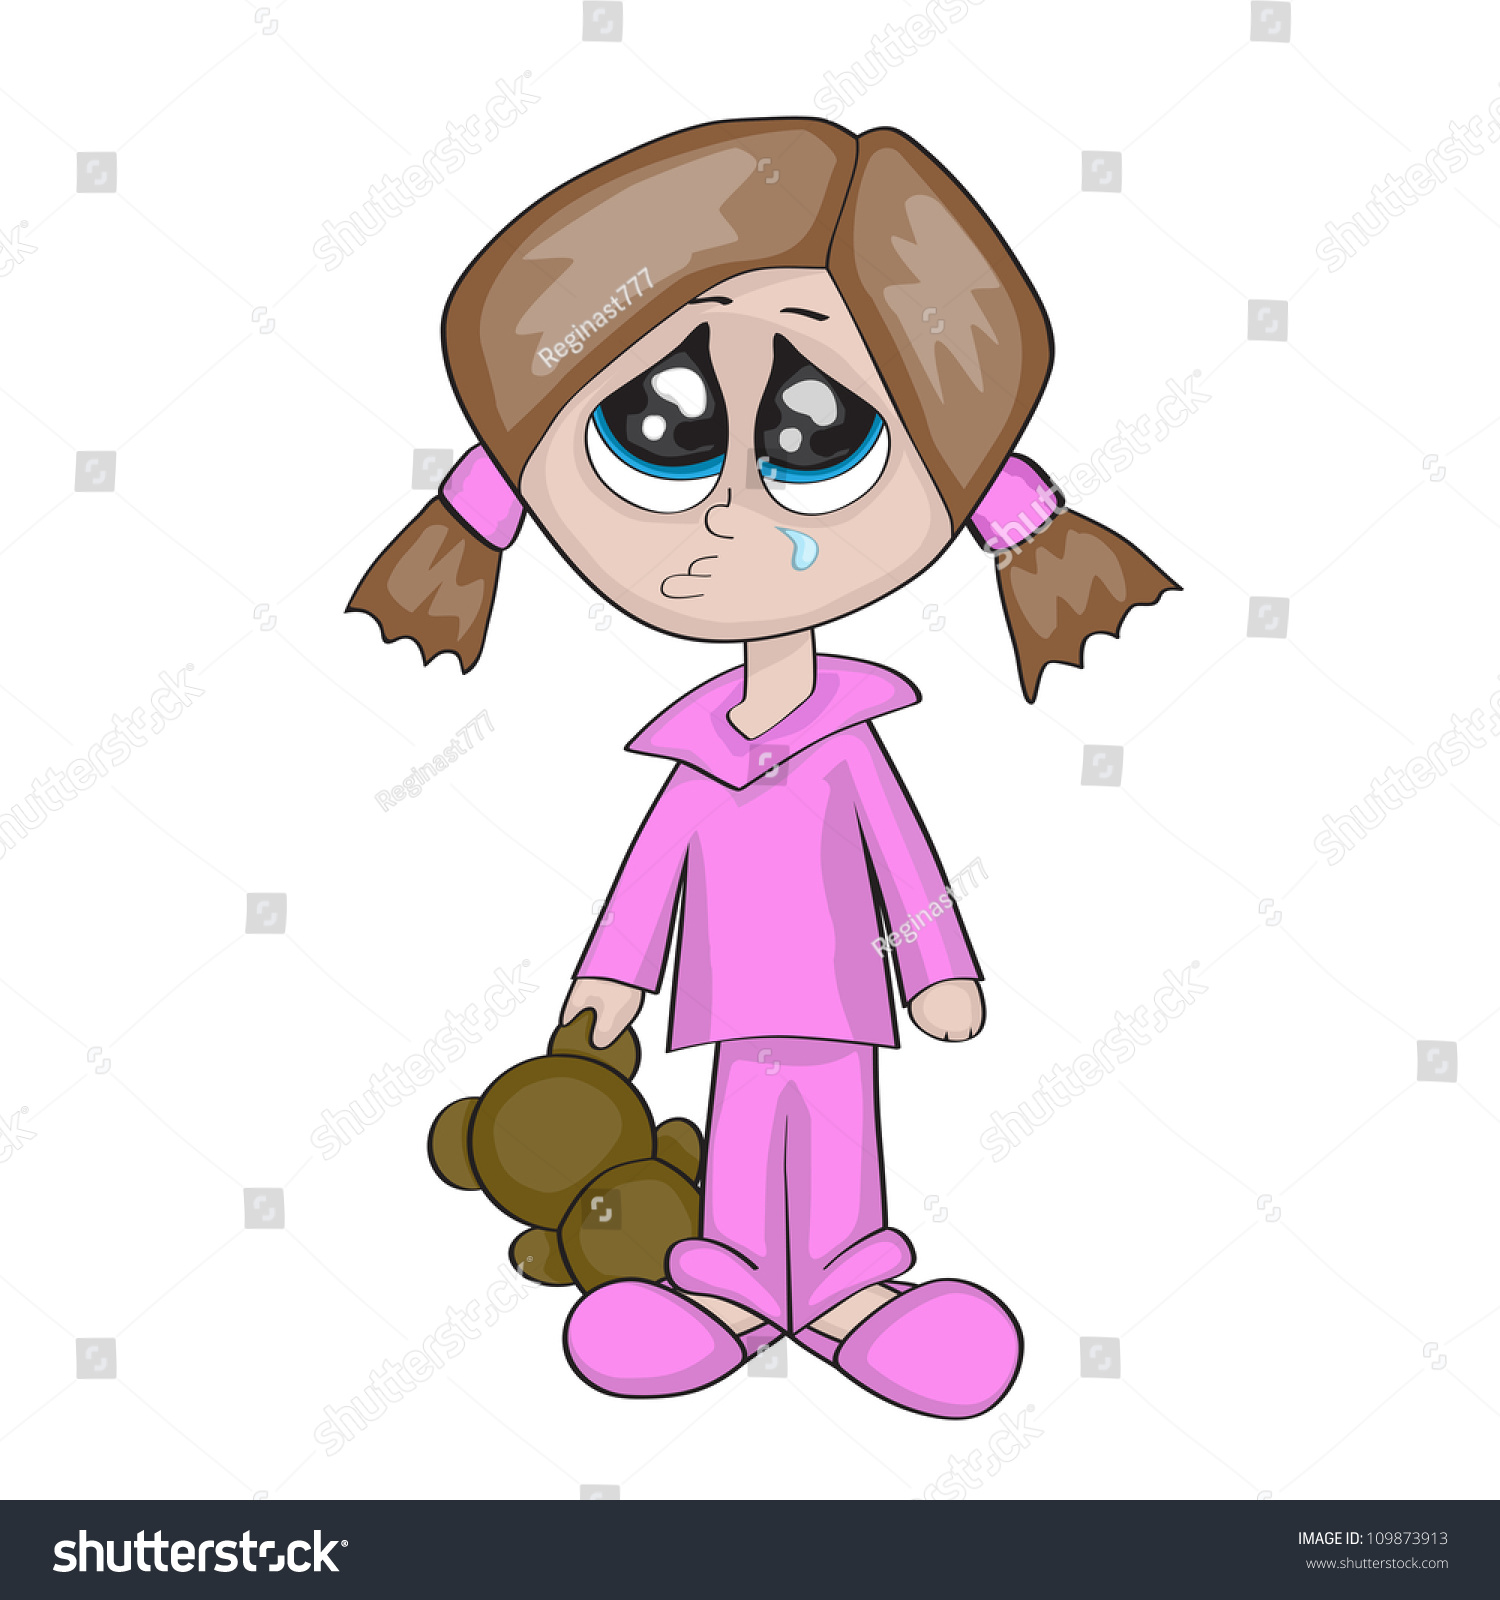 clipart of little girl crying - photo #48